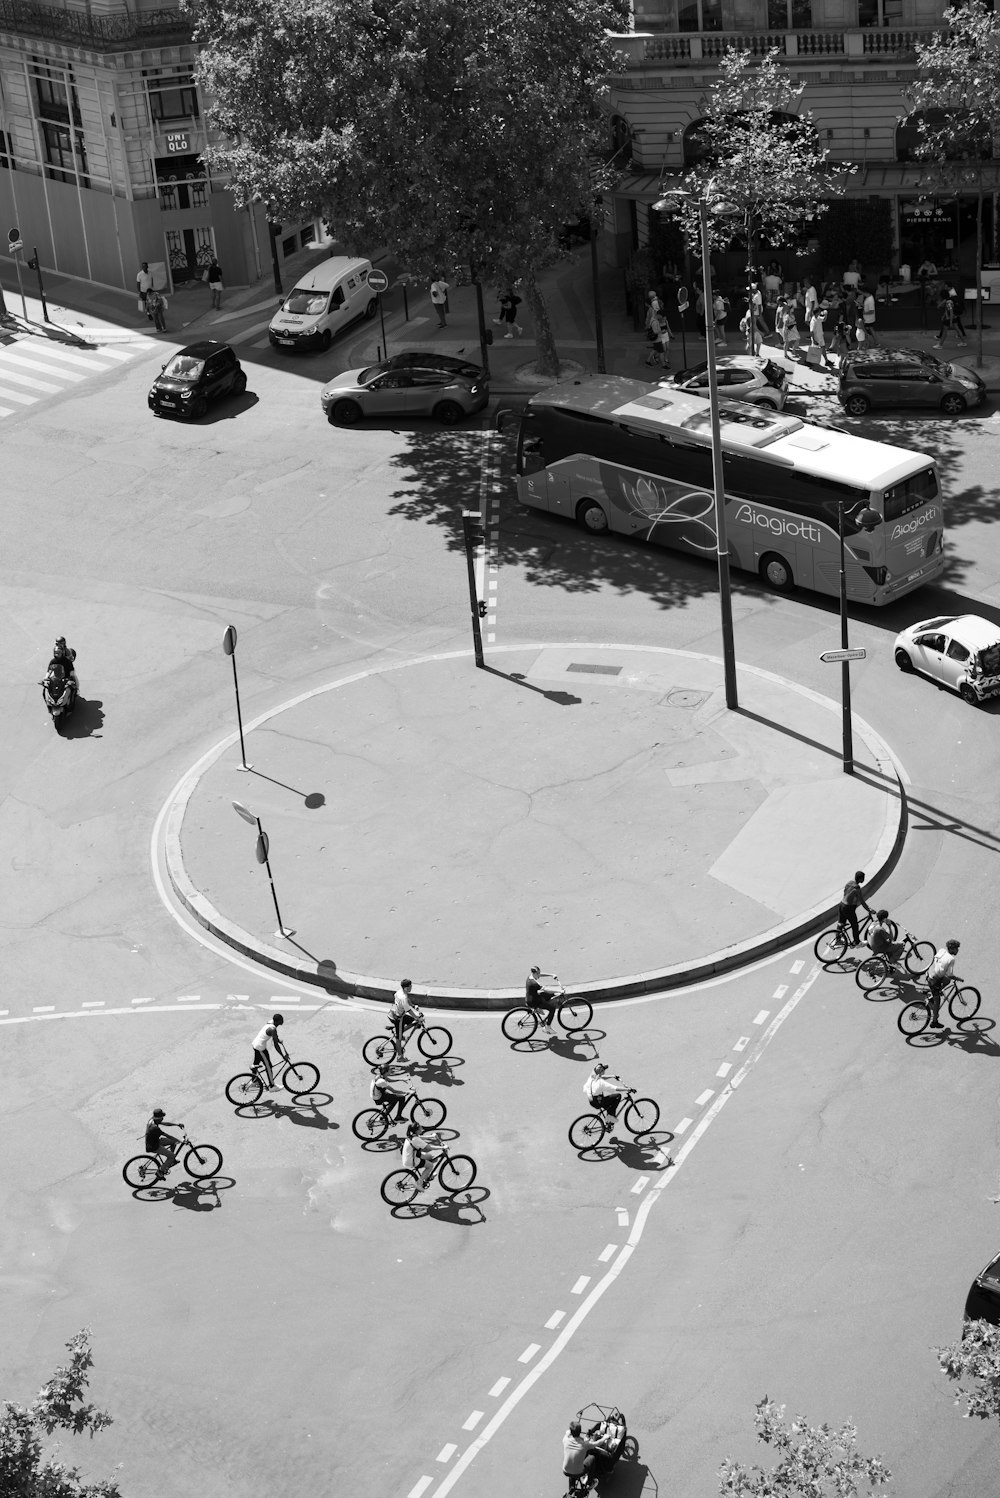 a group of bicyclists are riding around a circle